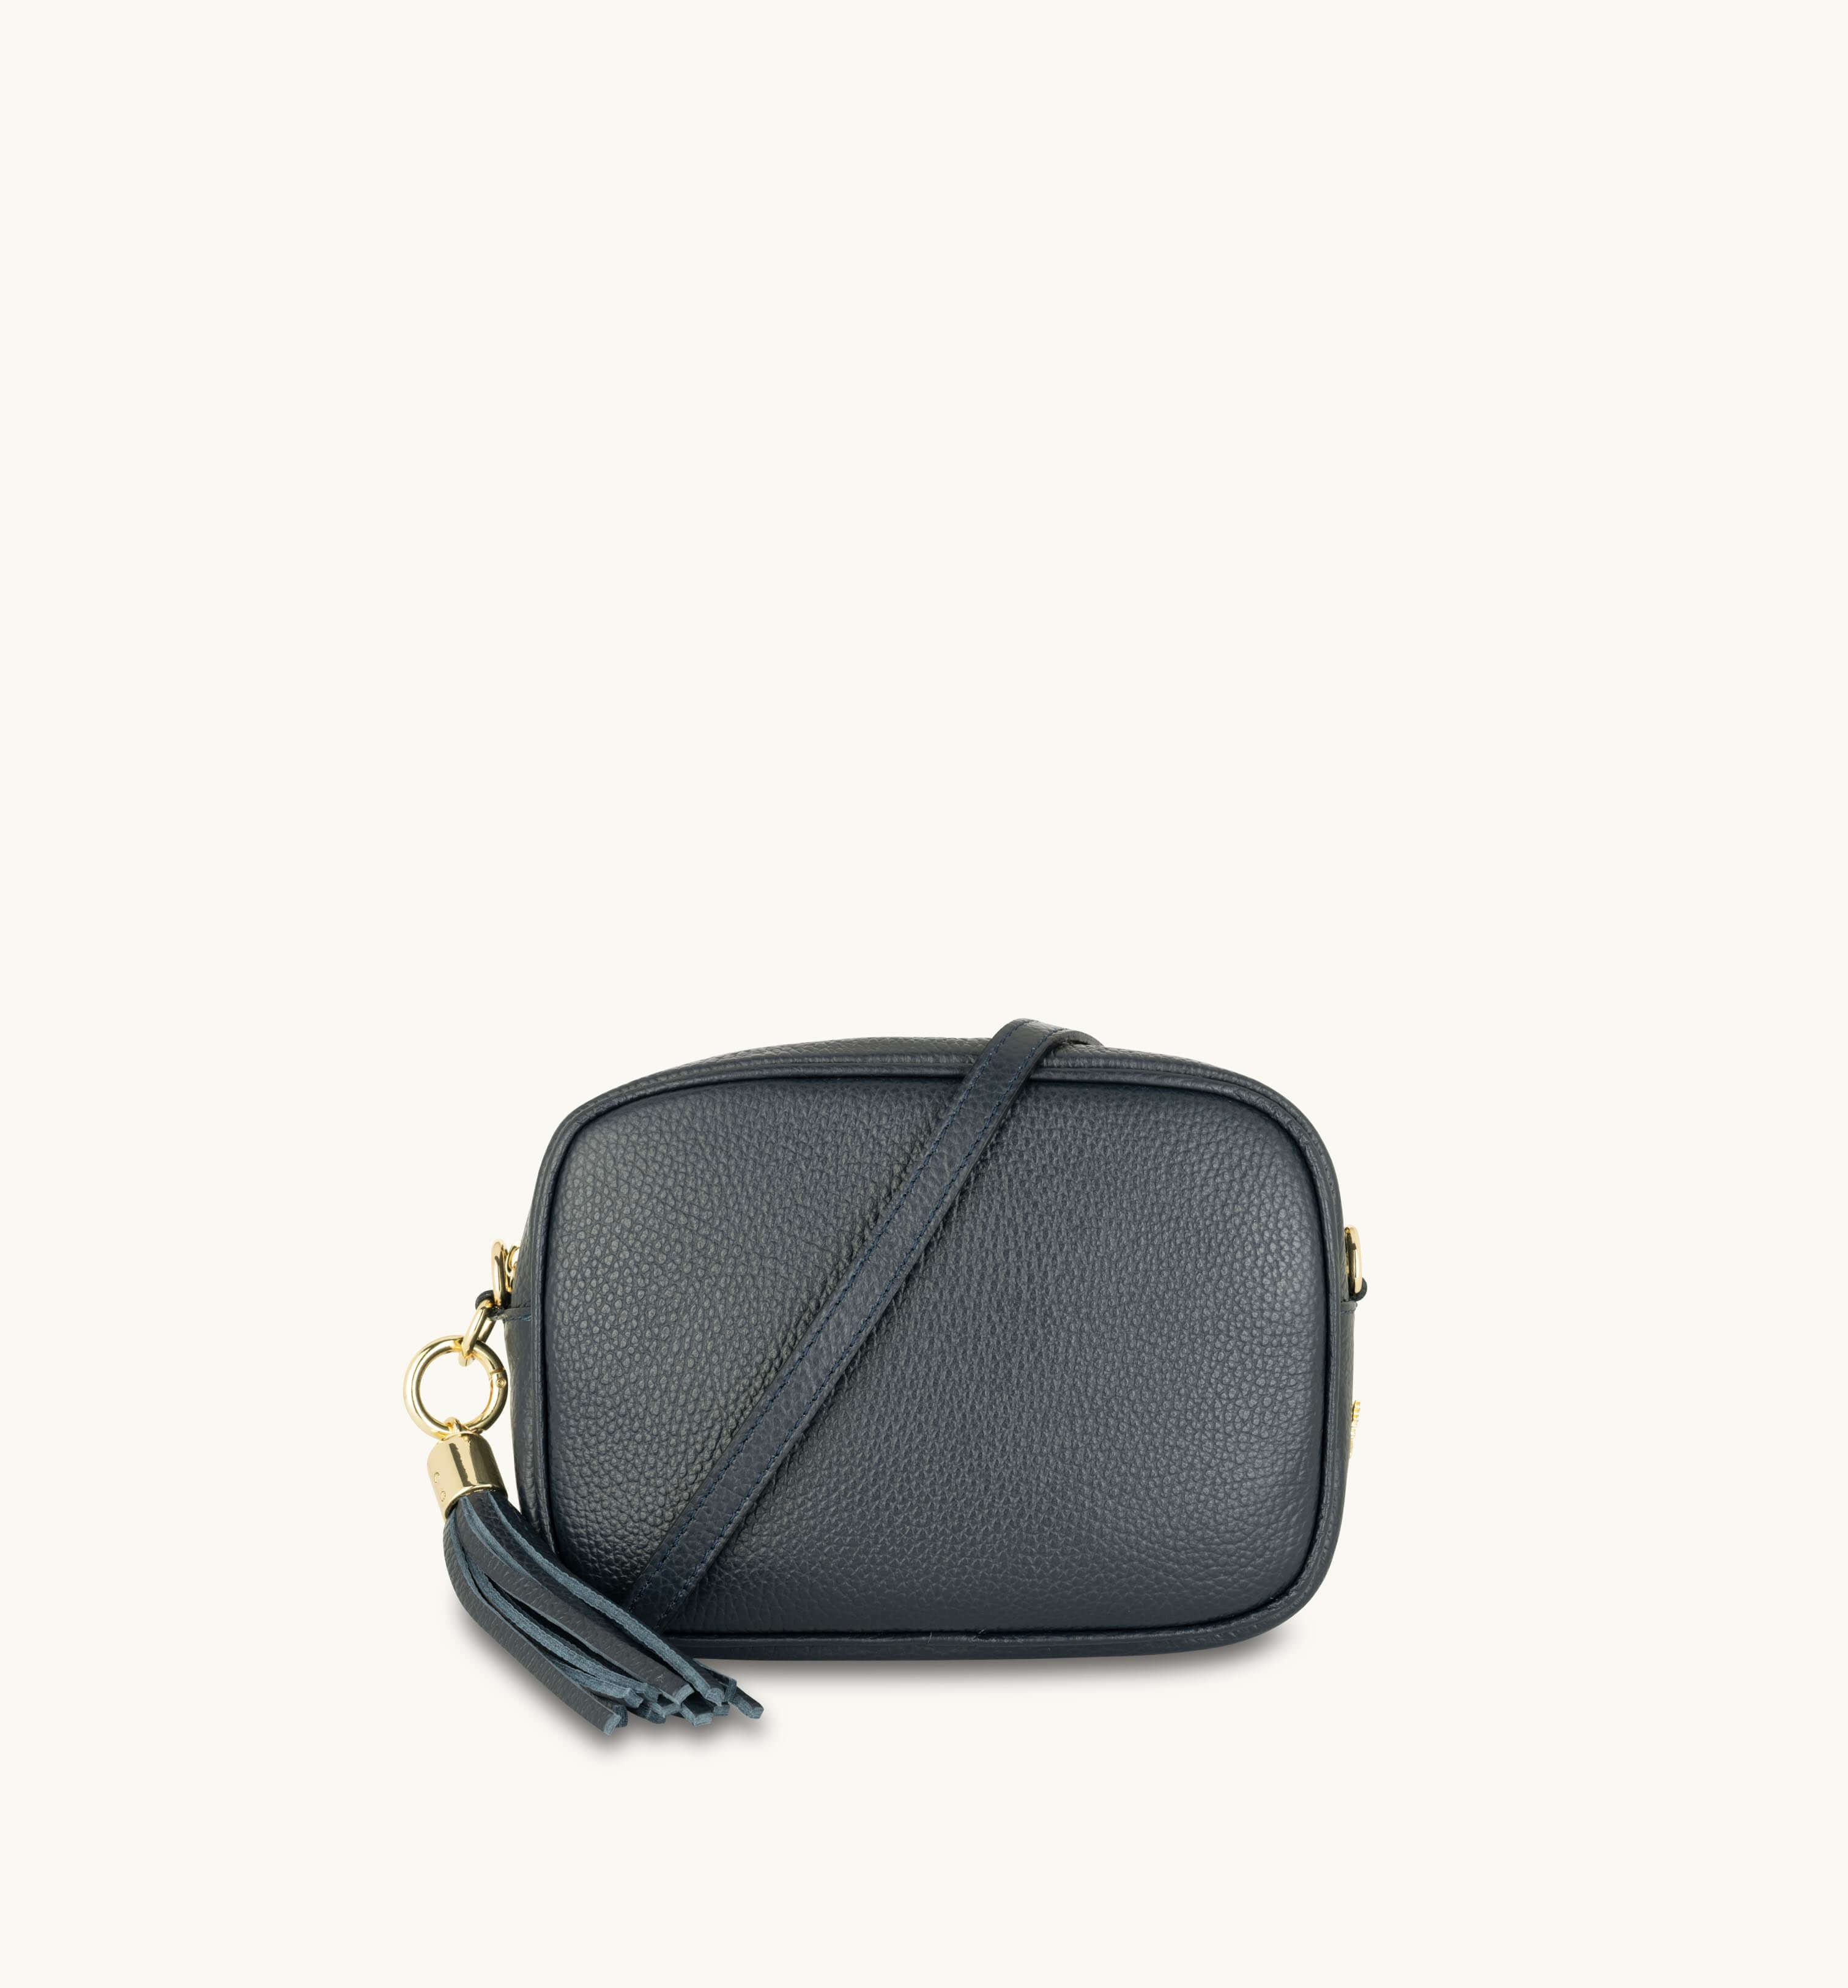 The Tassel Navy Leather Crossbody Bag With Olive Green Cheetah Strap